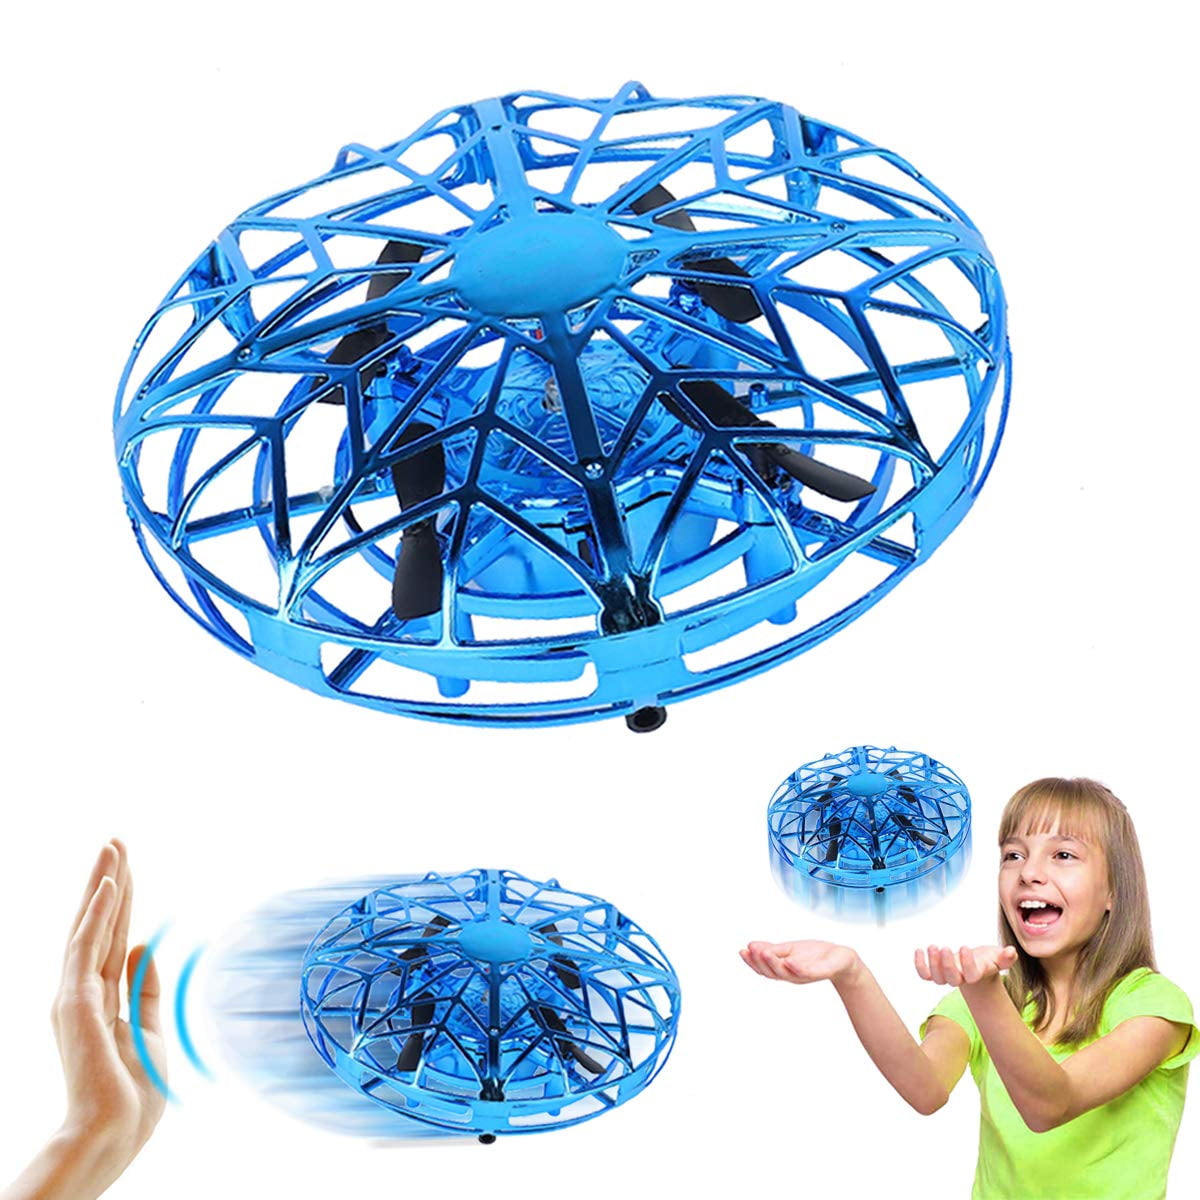 ufo drone toy reviews